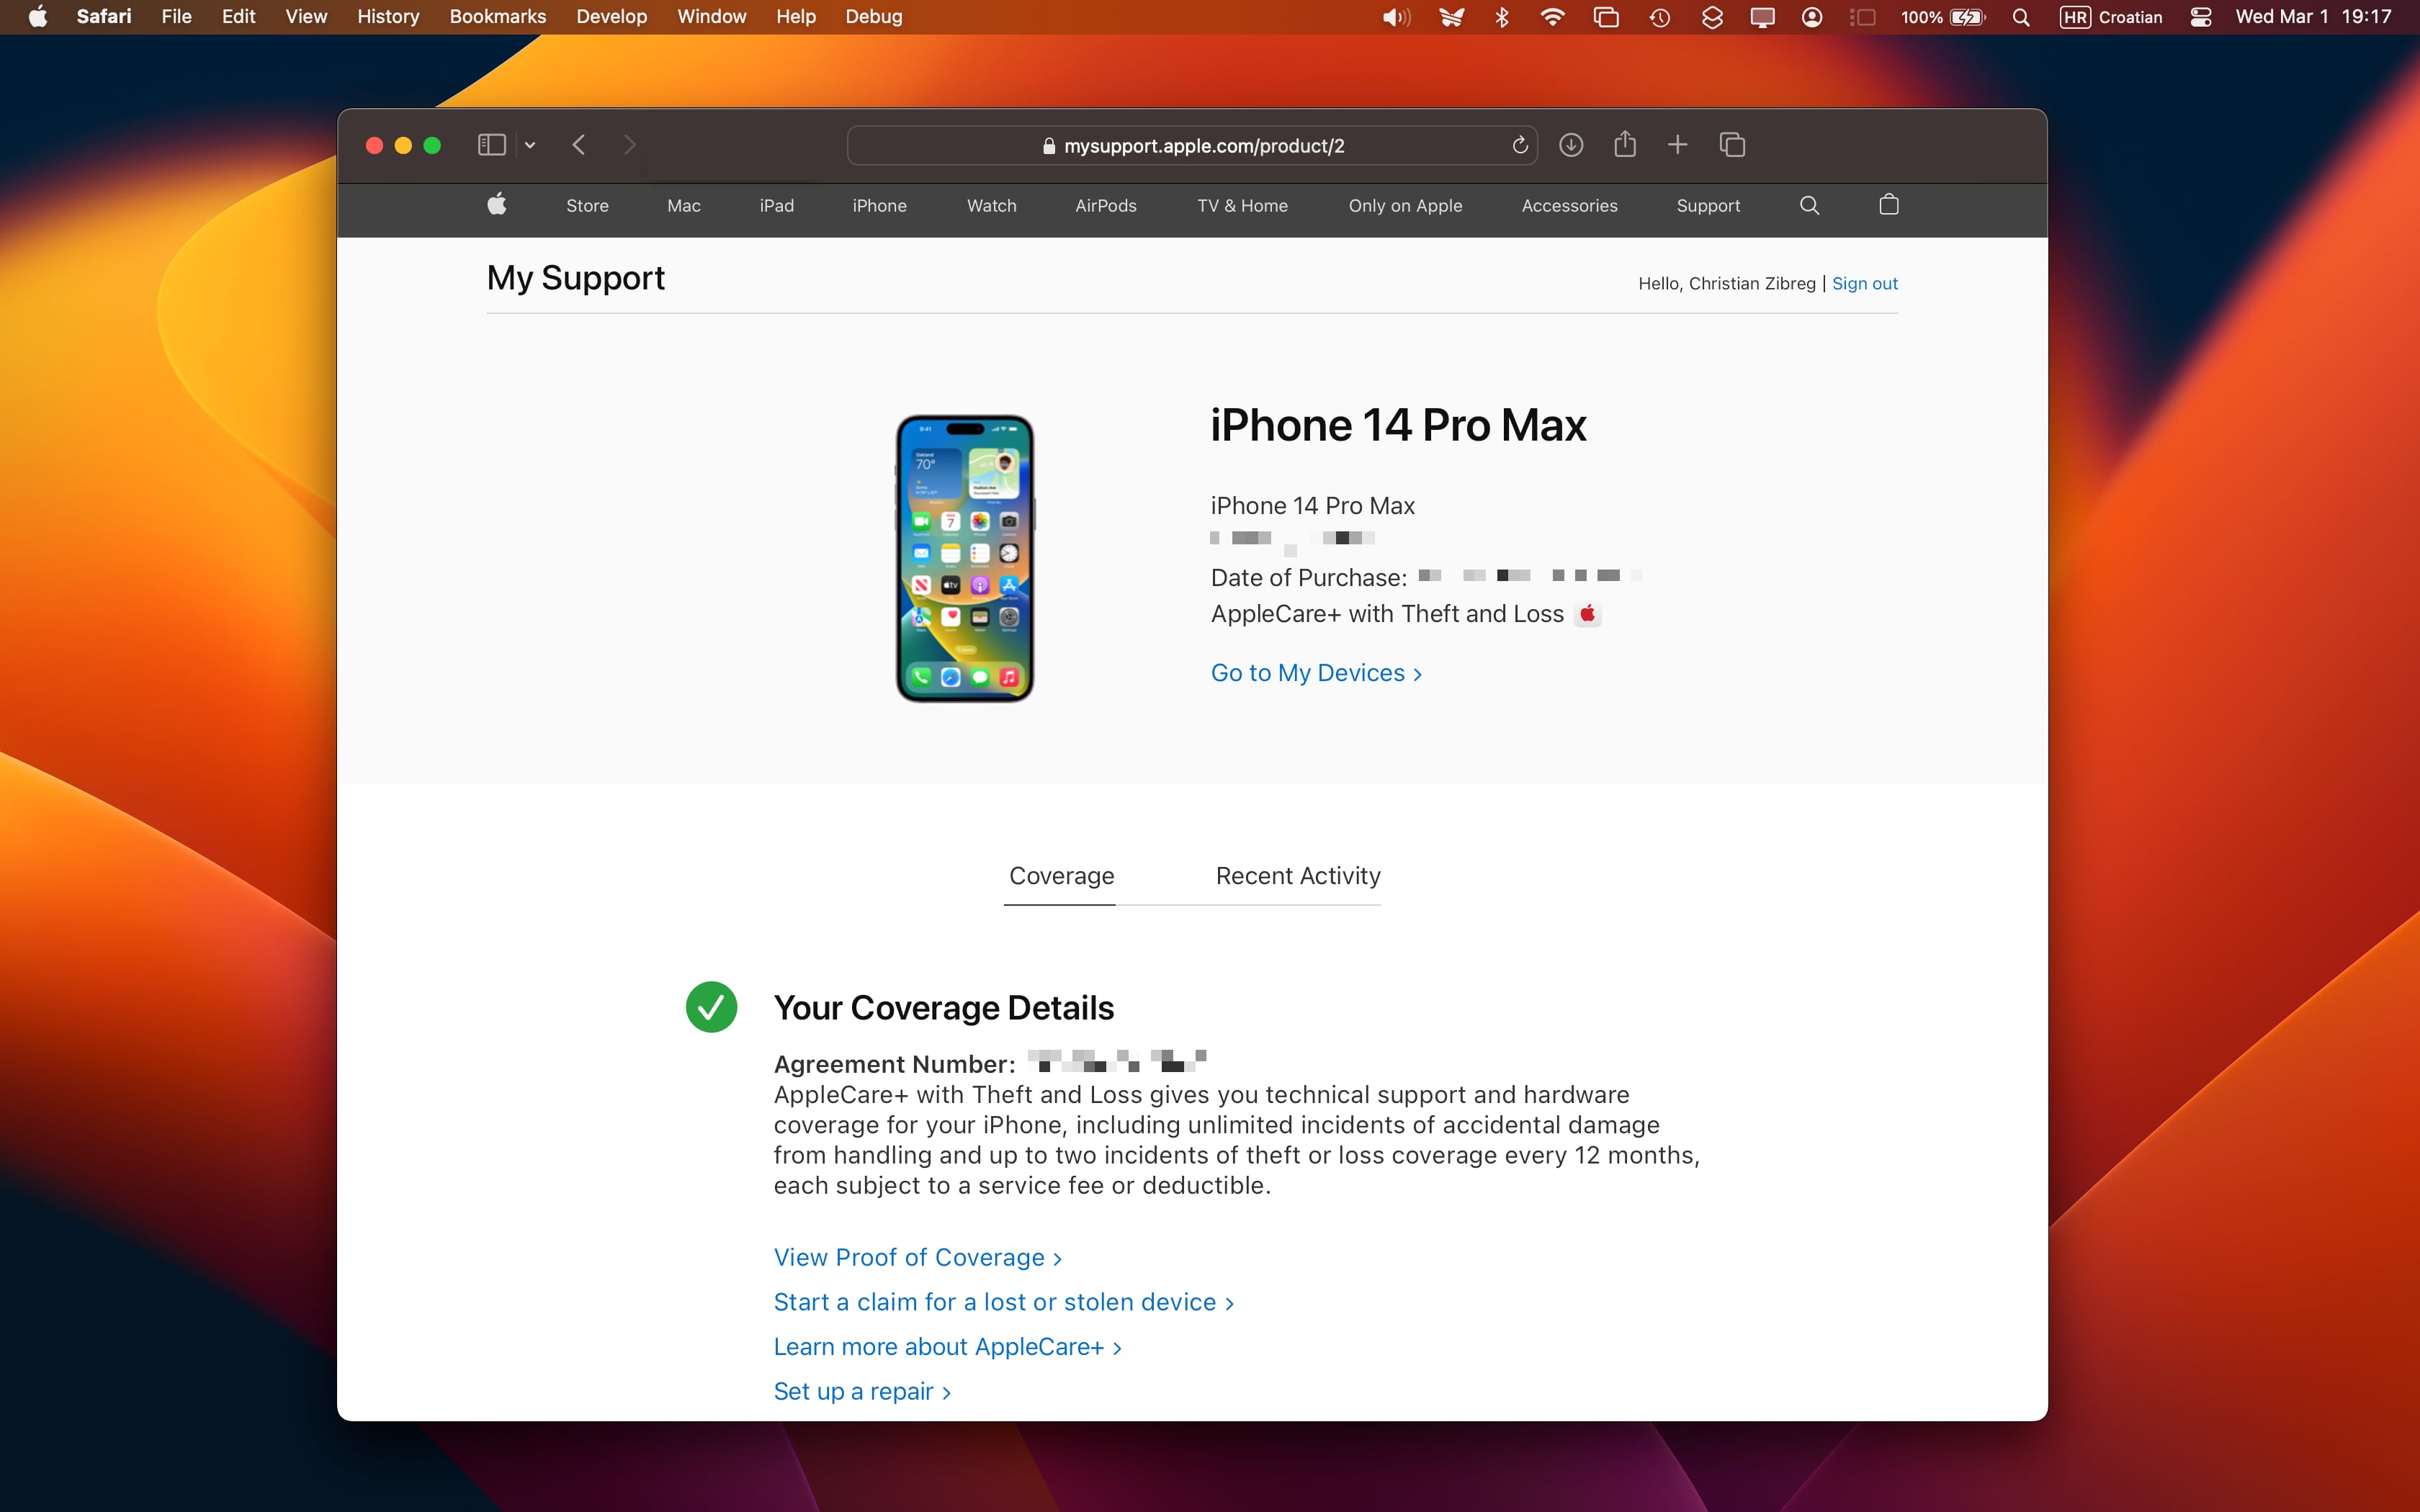 Viewing detailed AppleCare+ coverage information for iPhone 14 Pro Max on the My Support website